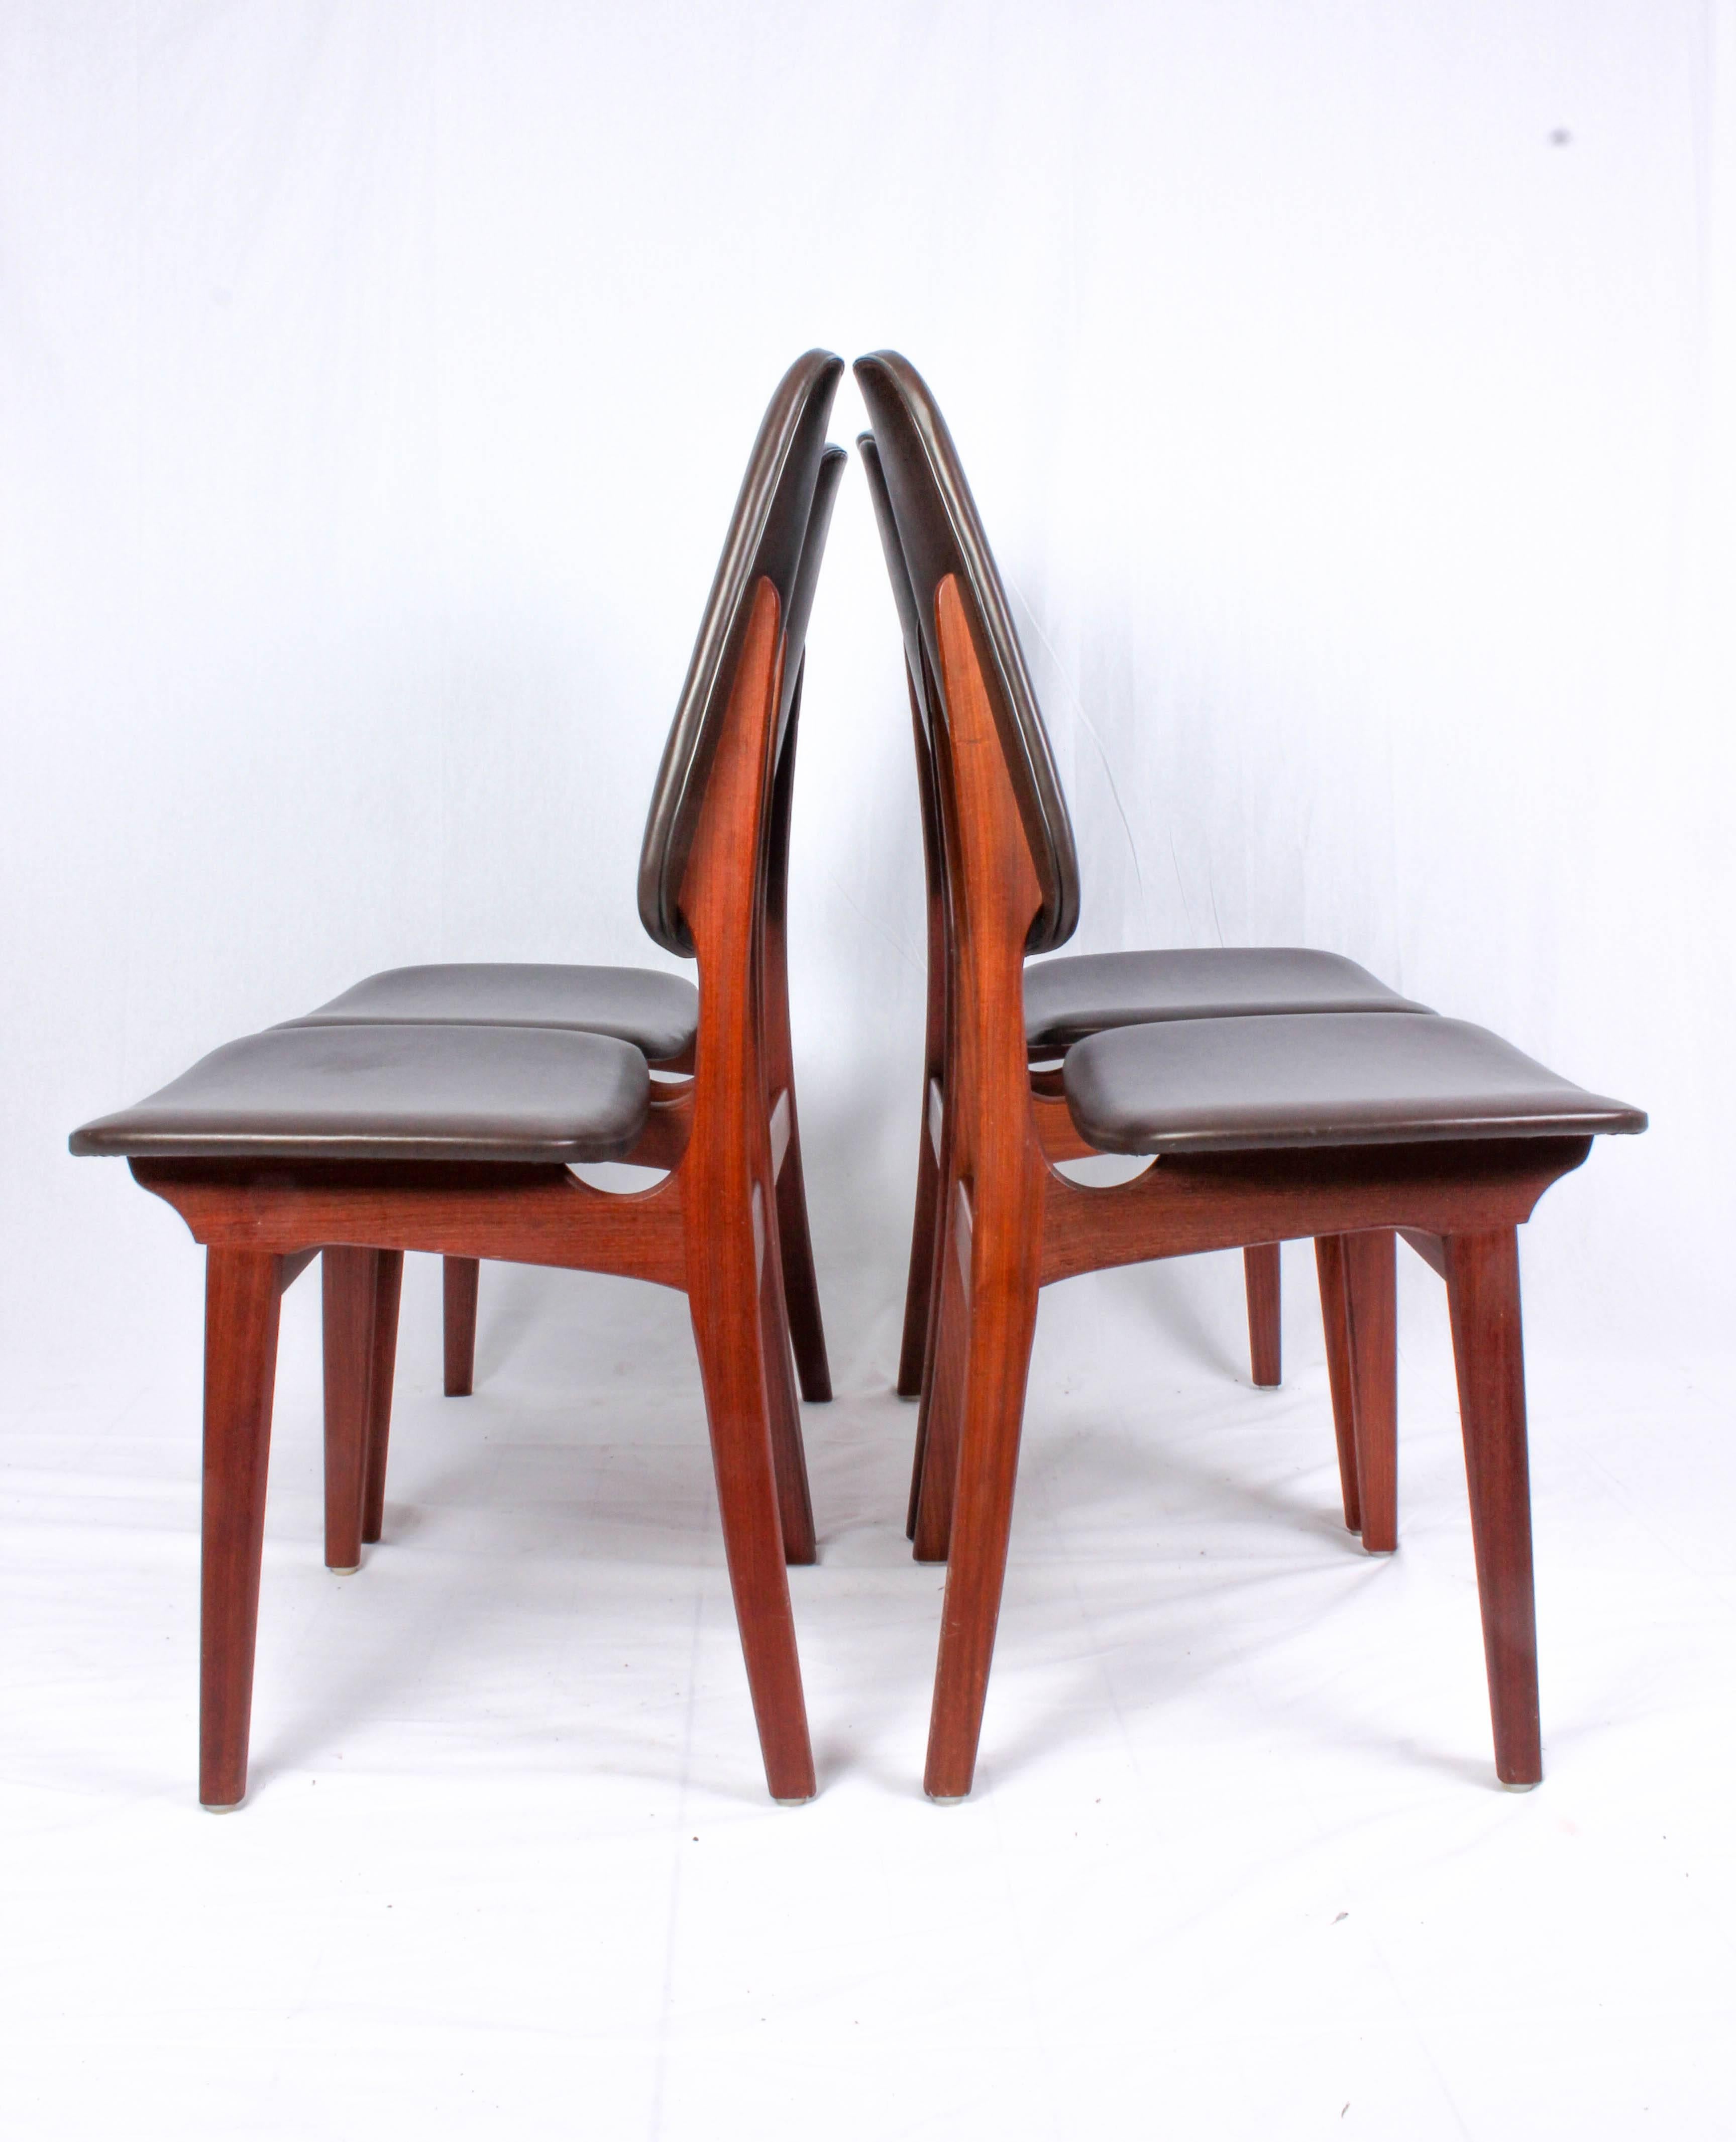 Set of four teak dining chairs with original brown faux-leather upholstery by Brødrene Sørheim. The chairs are in very good vintage condition with signs of usage consistent with age. There are som minor scuffs on the upholstery.